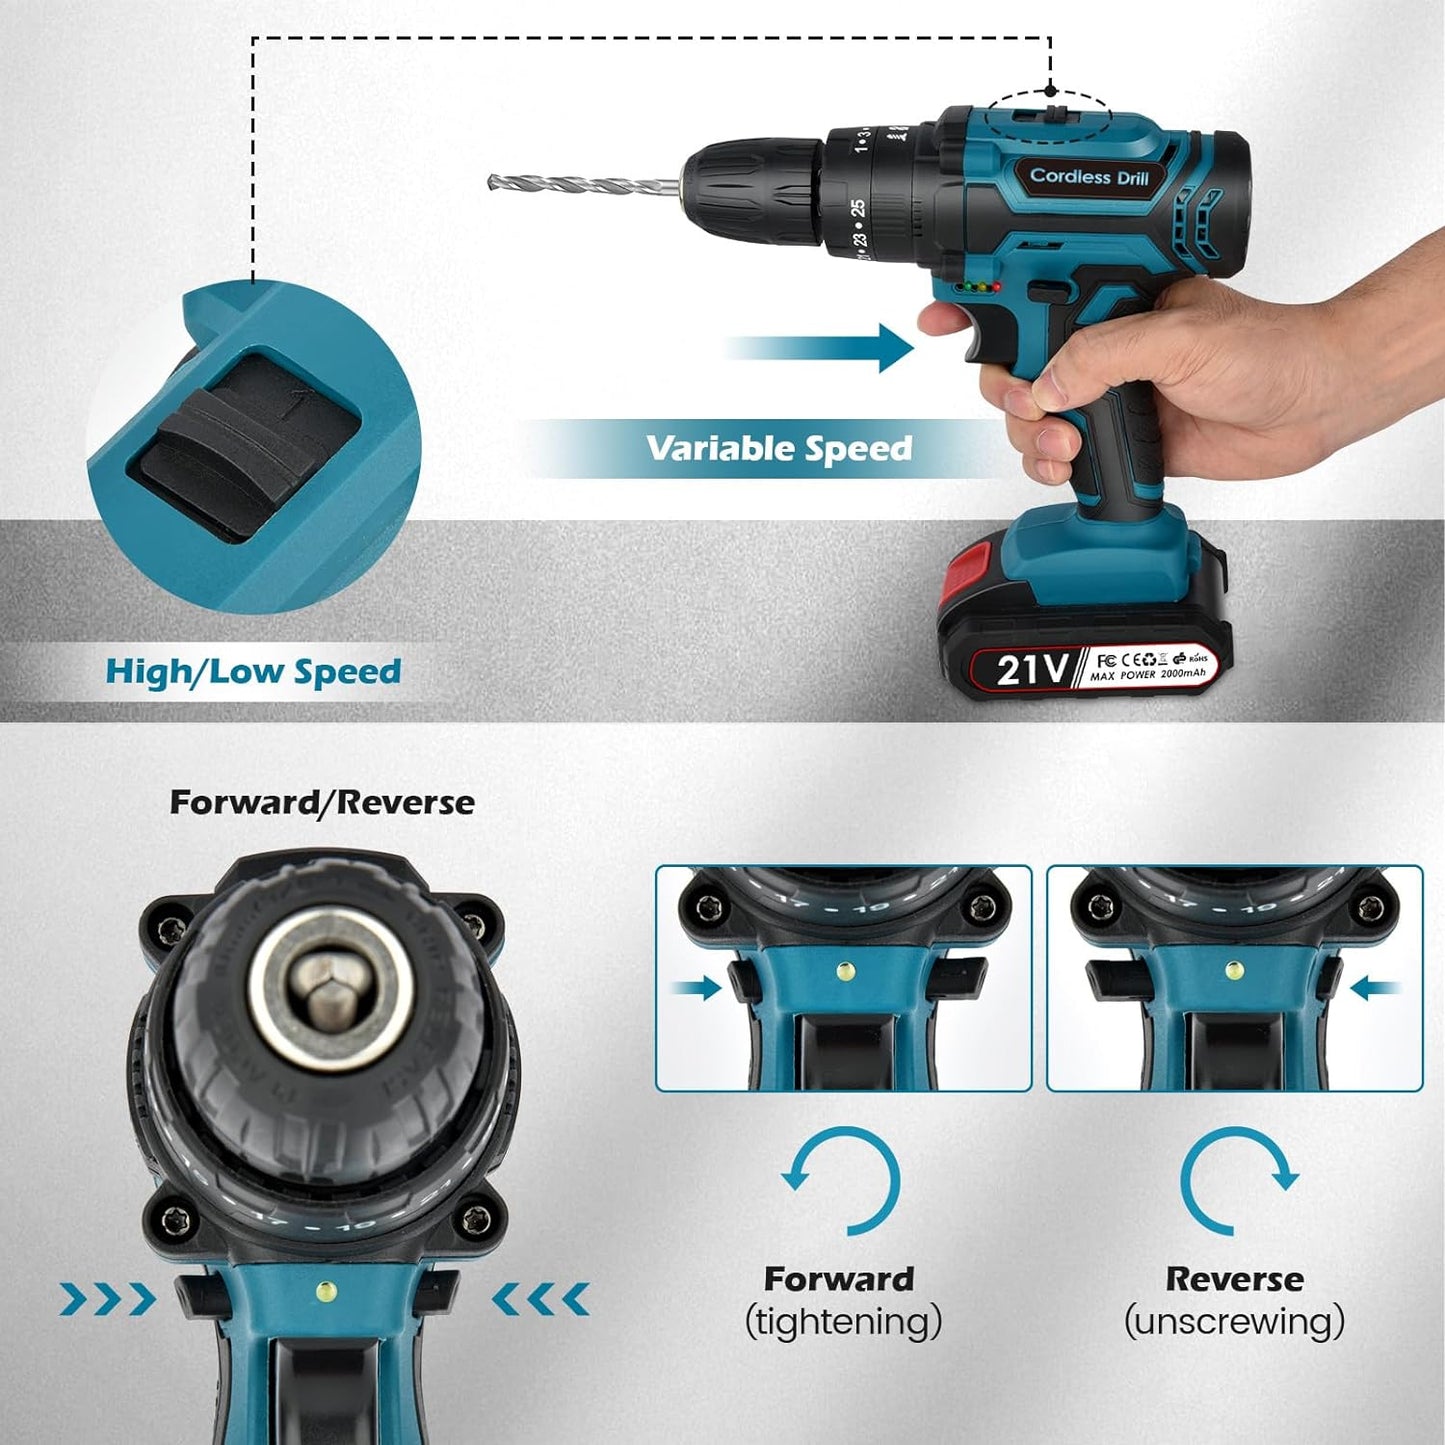 21V Cordless Drill Set: Electric Power Drill with Battery and Charger